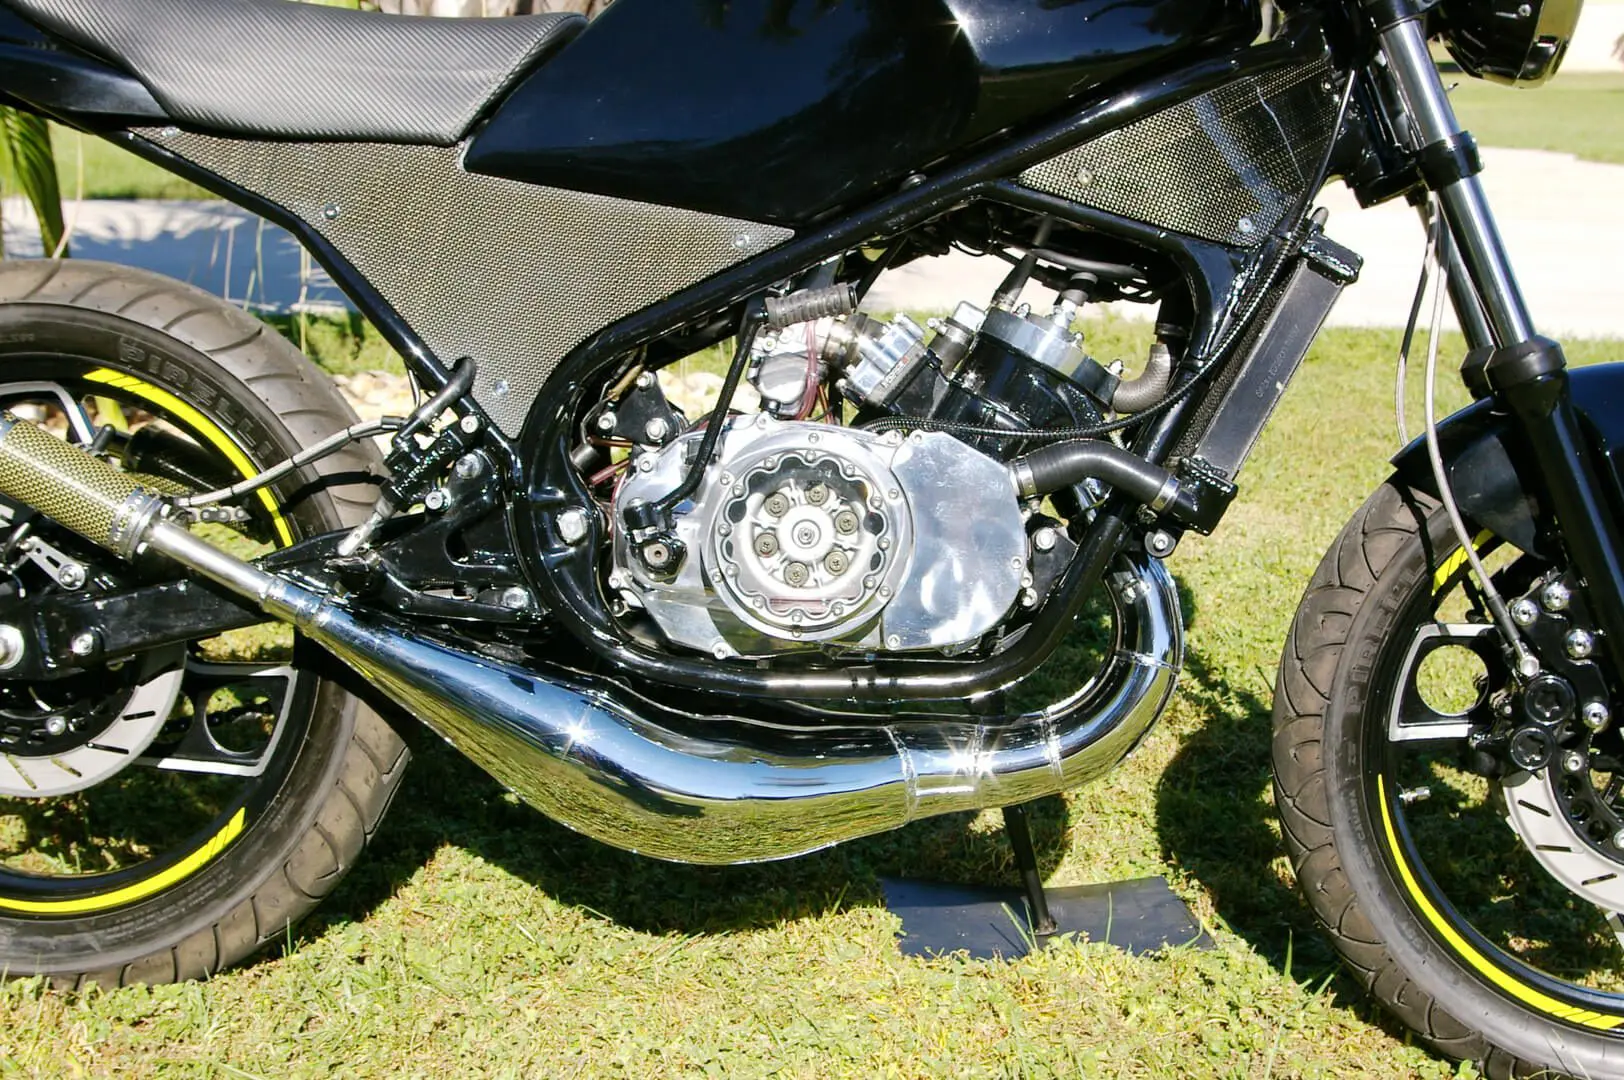 A motorcycle is parked on the grass near a fence.